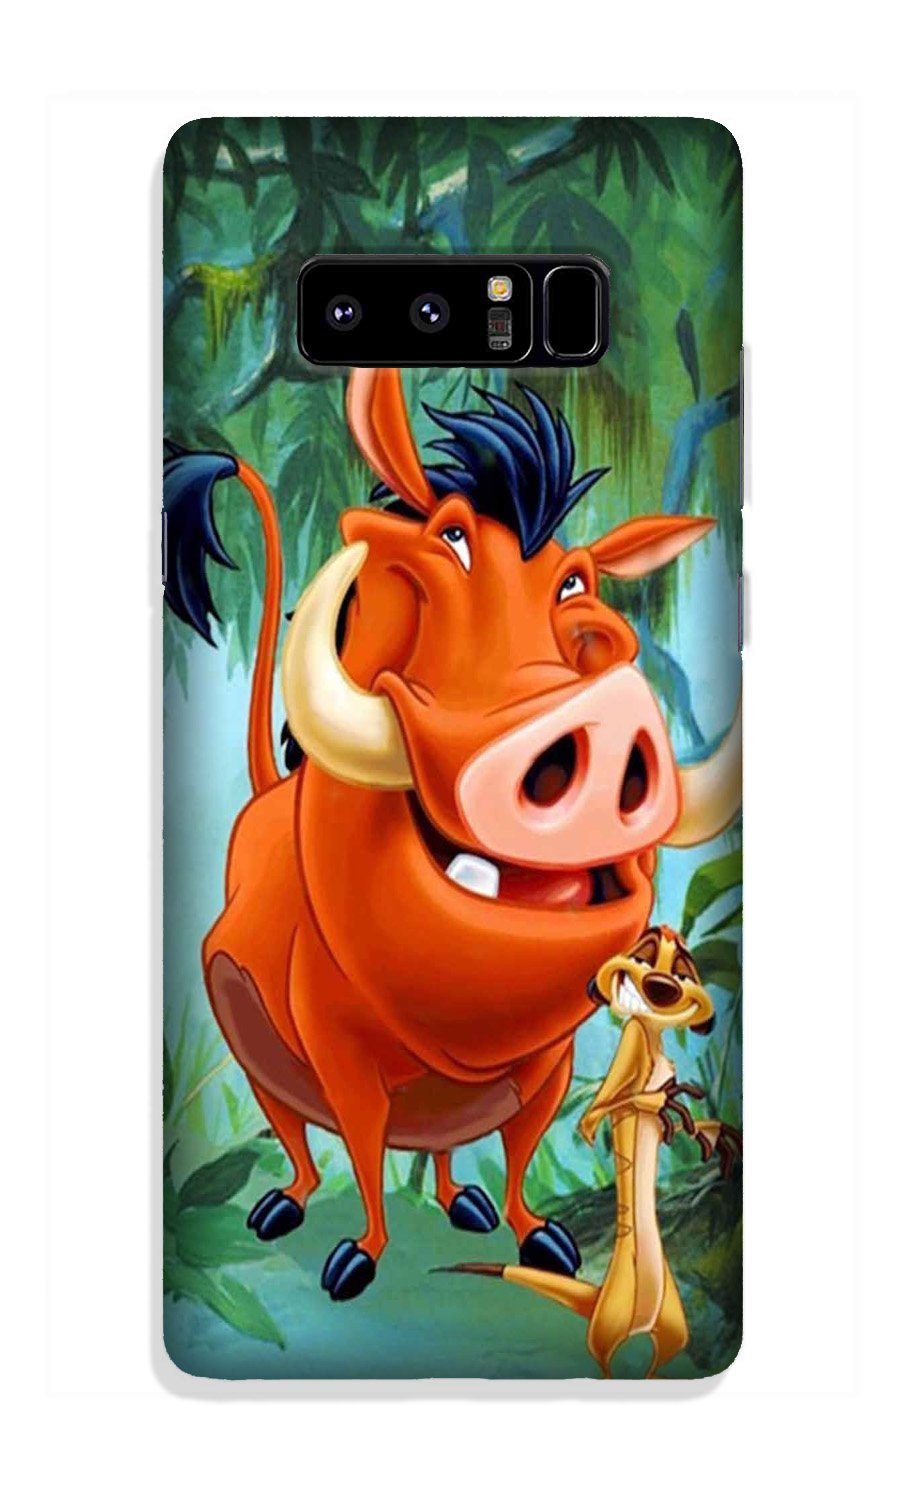 Timon and Pumbaa Mobile Back Case for Galaxy Note 8 (Design - 305)